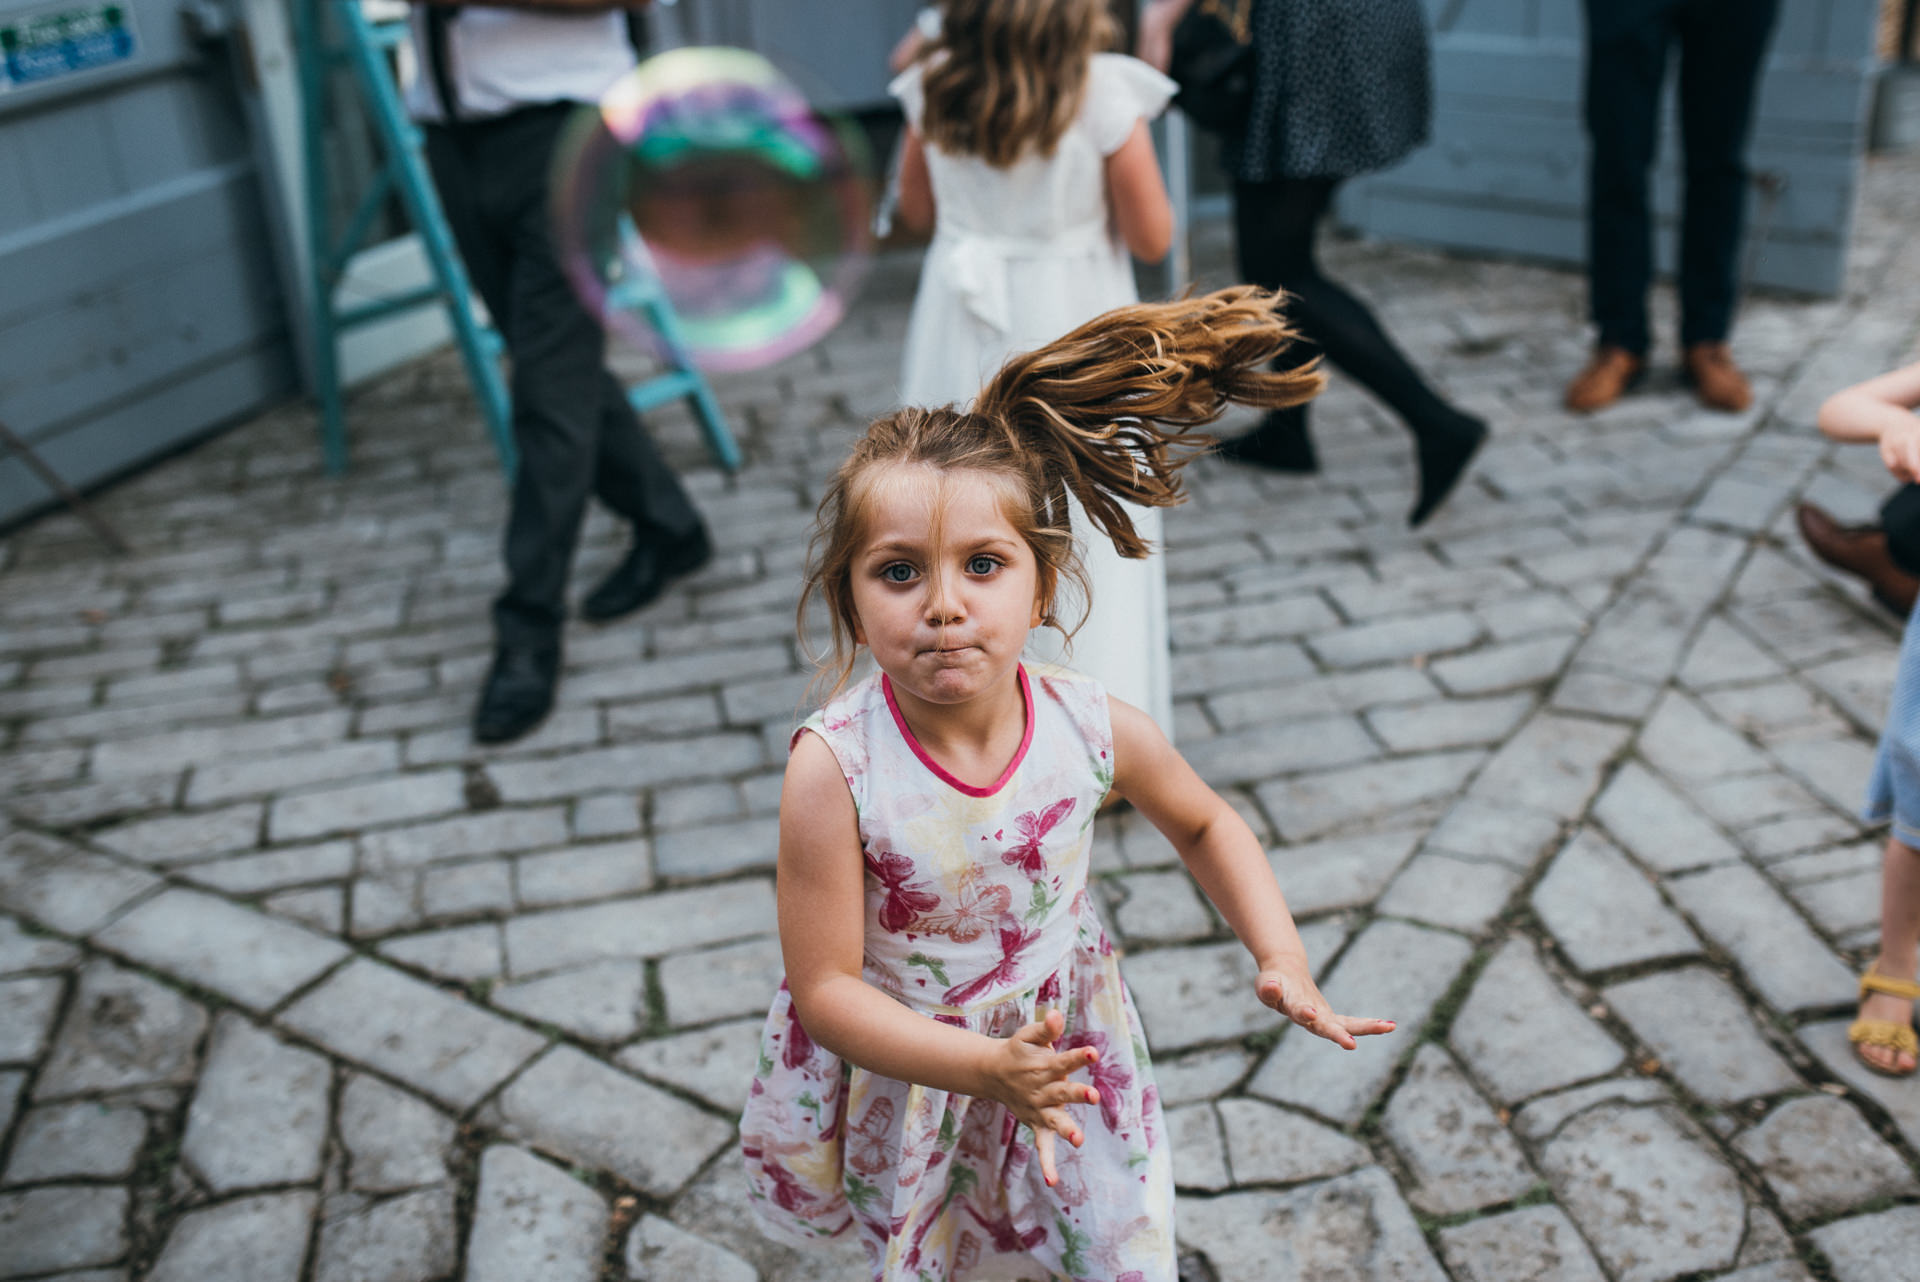 Girl chasing bubbles 